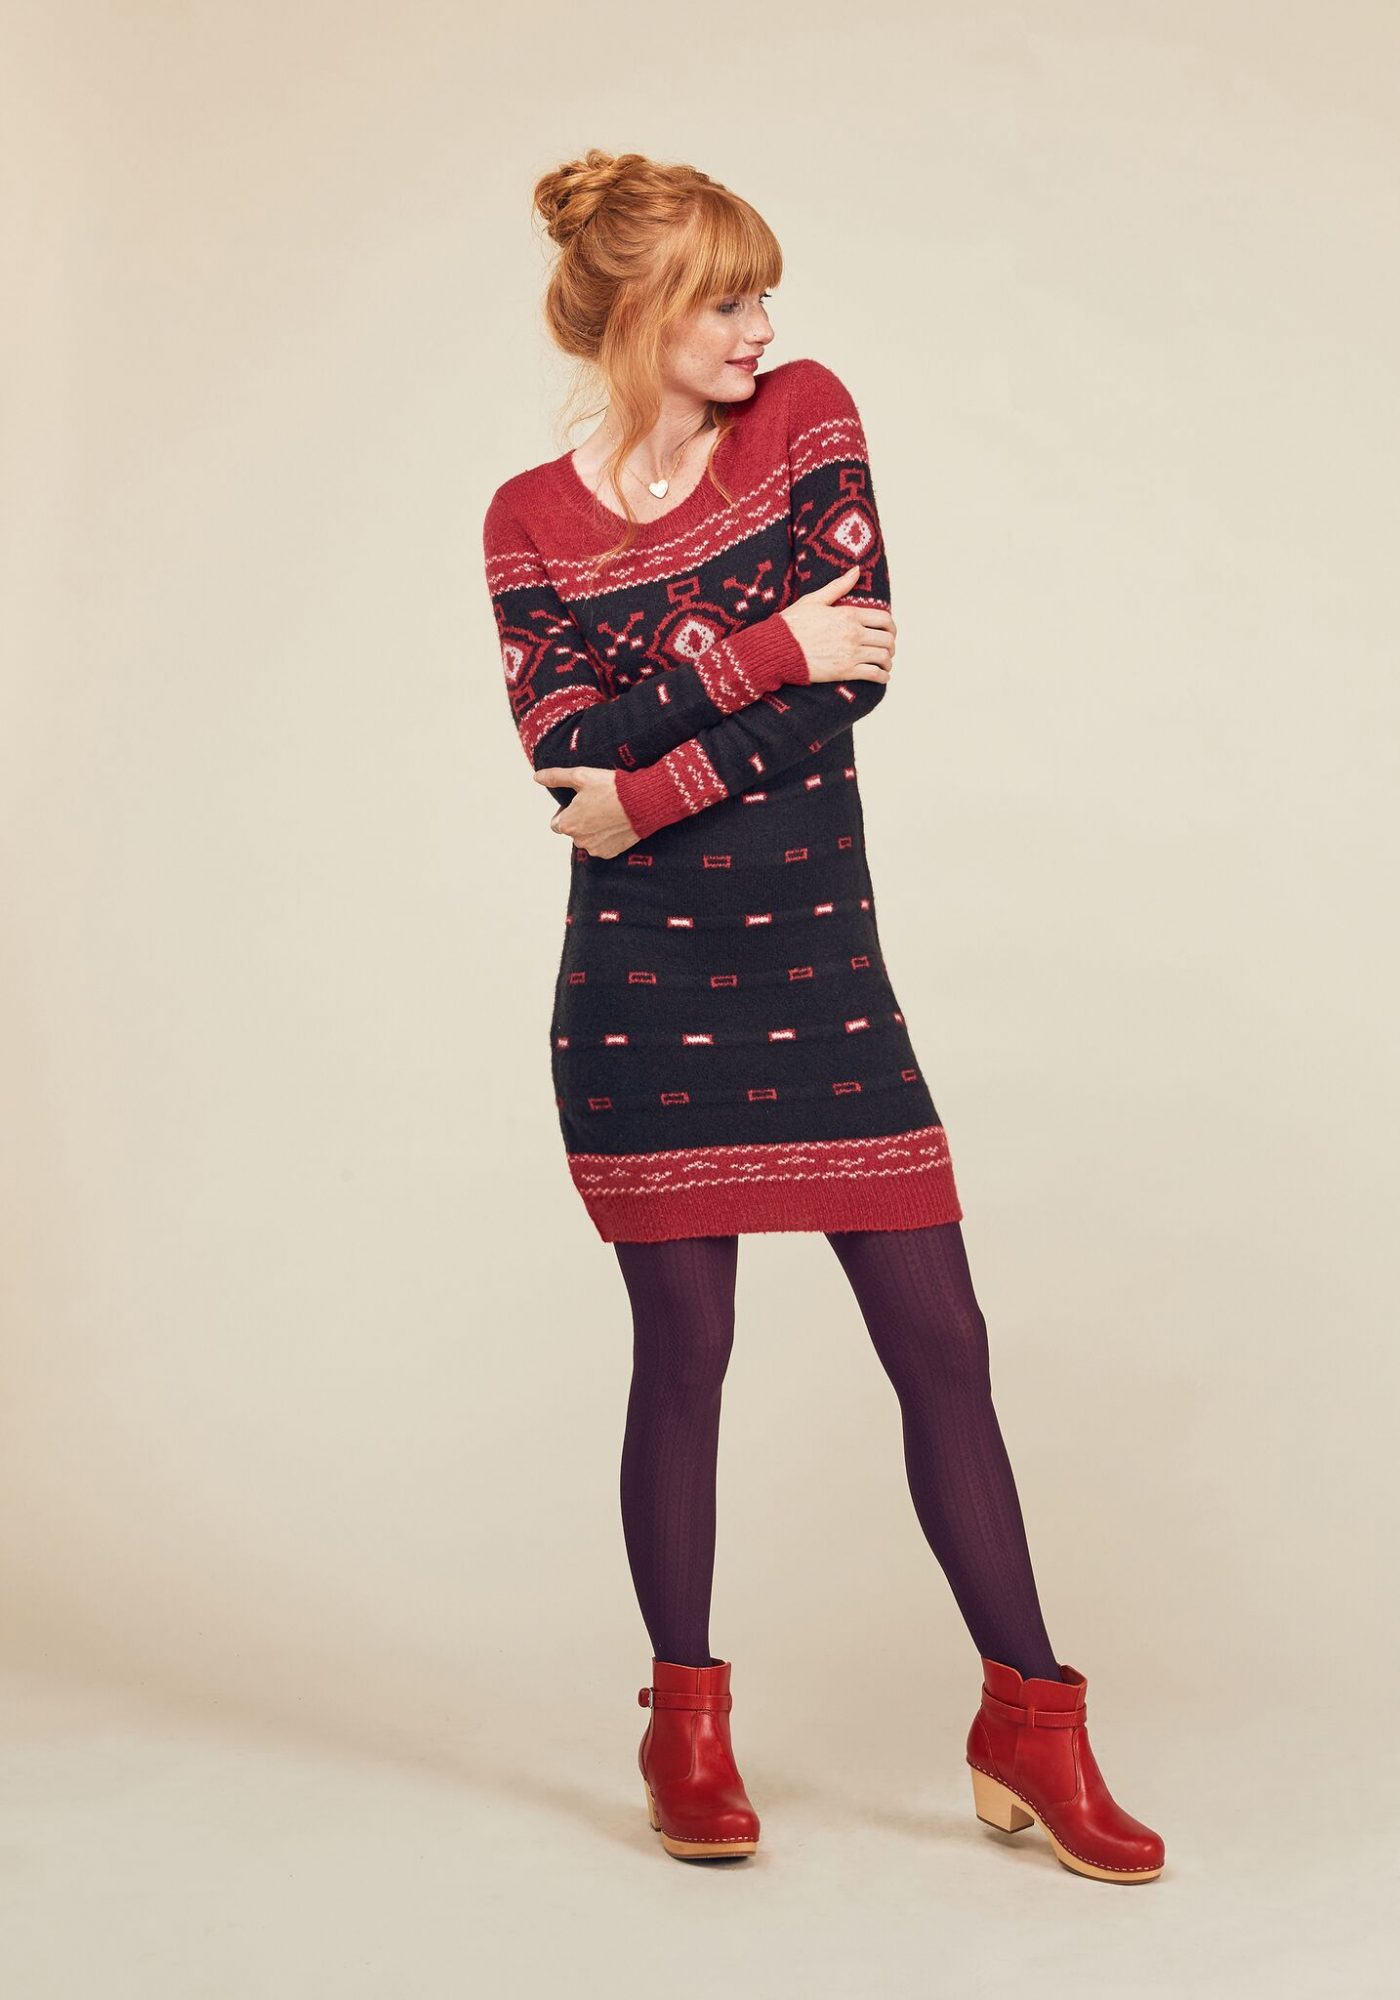 picture-of-modcloth-sweaterdress-photo.jpg